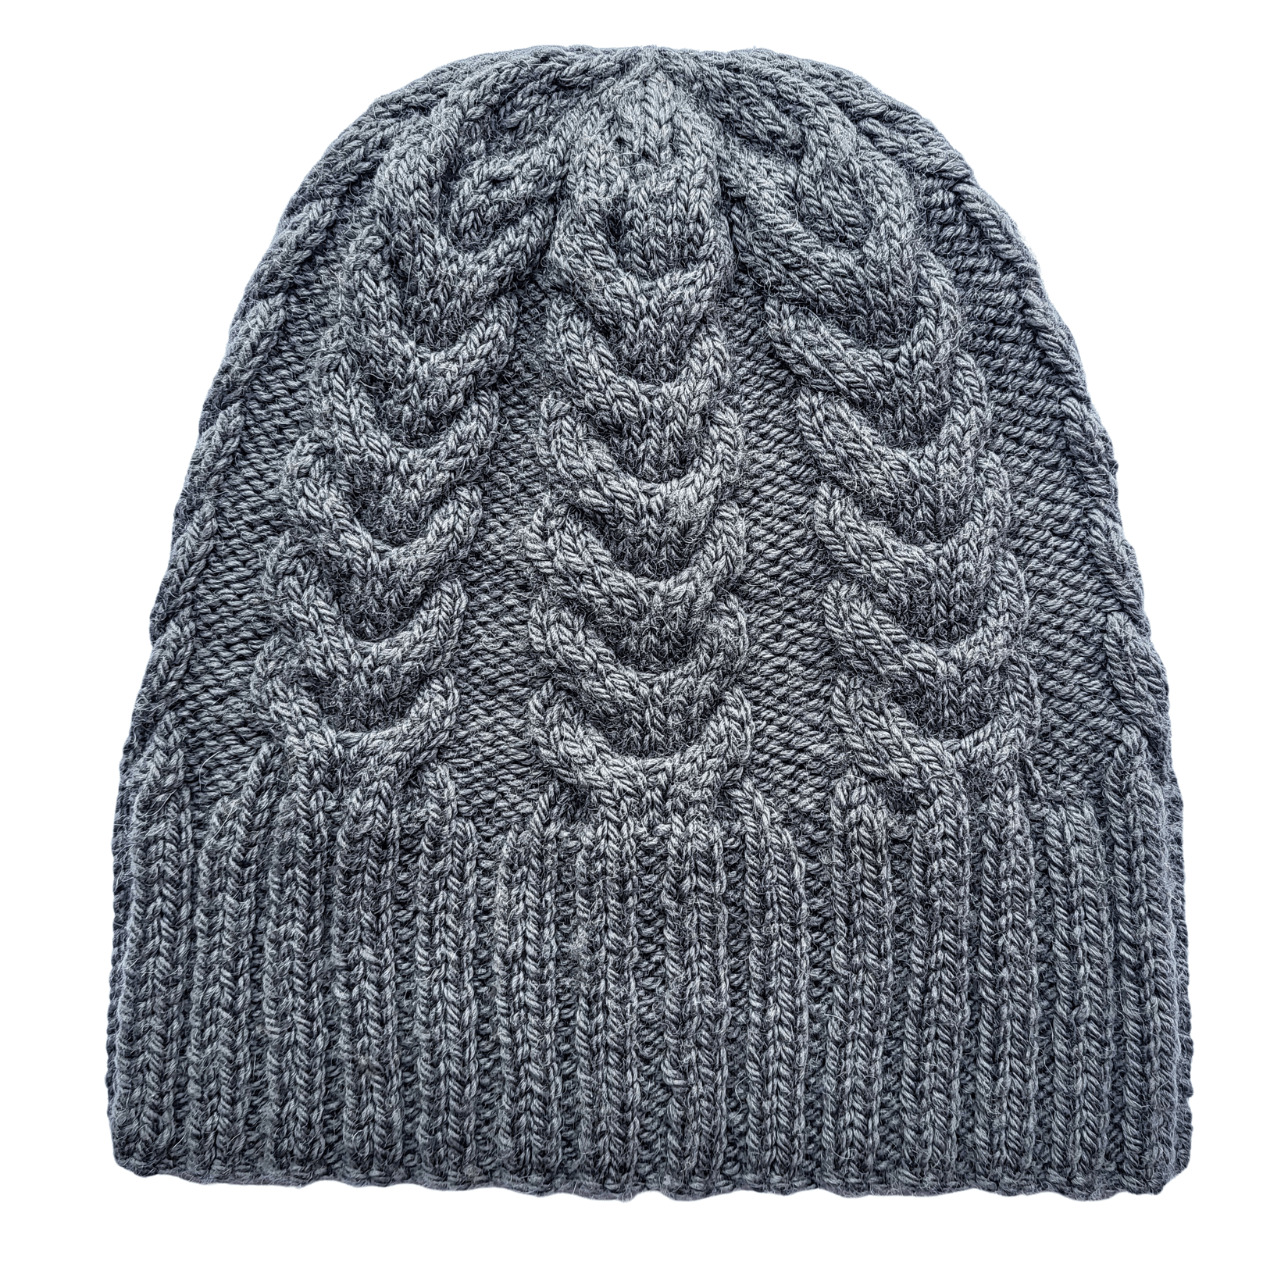 Sitting Knitting kit - Staghorn Cable hat